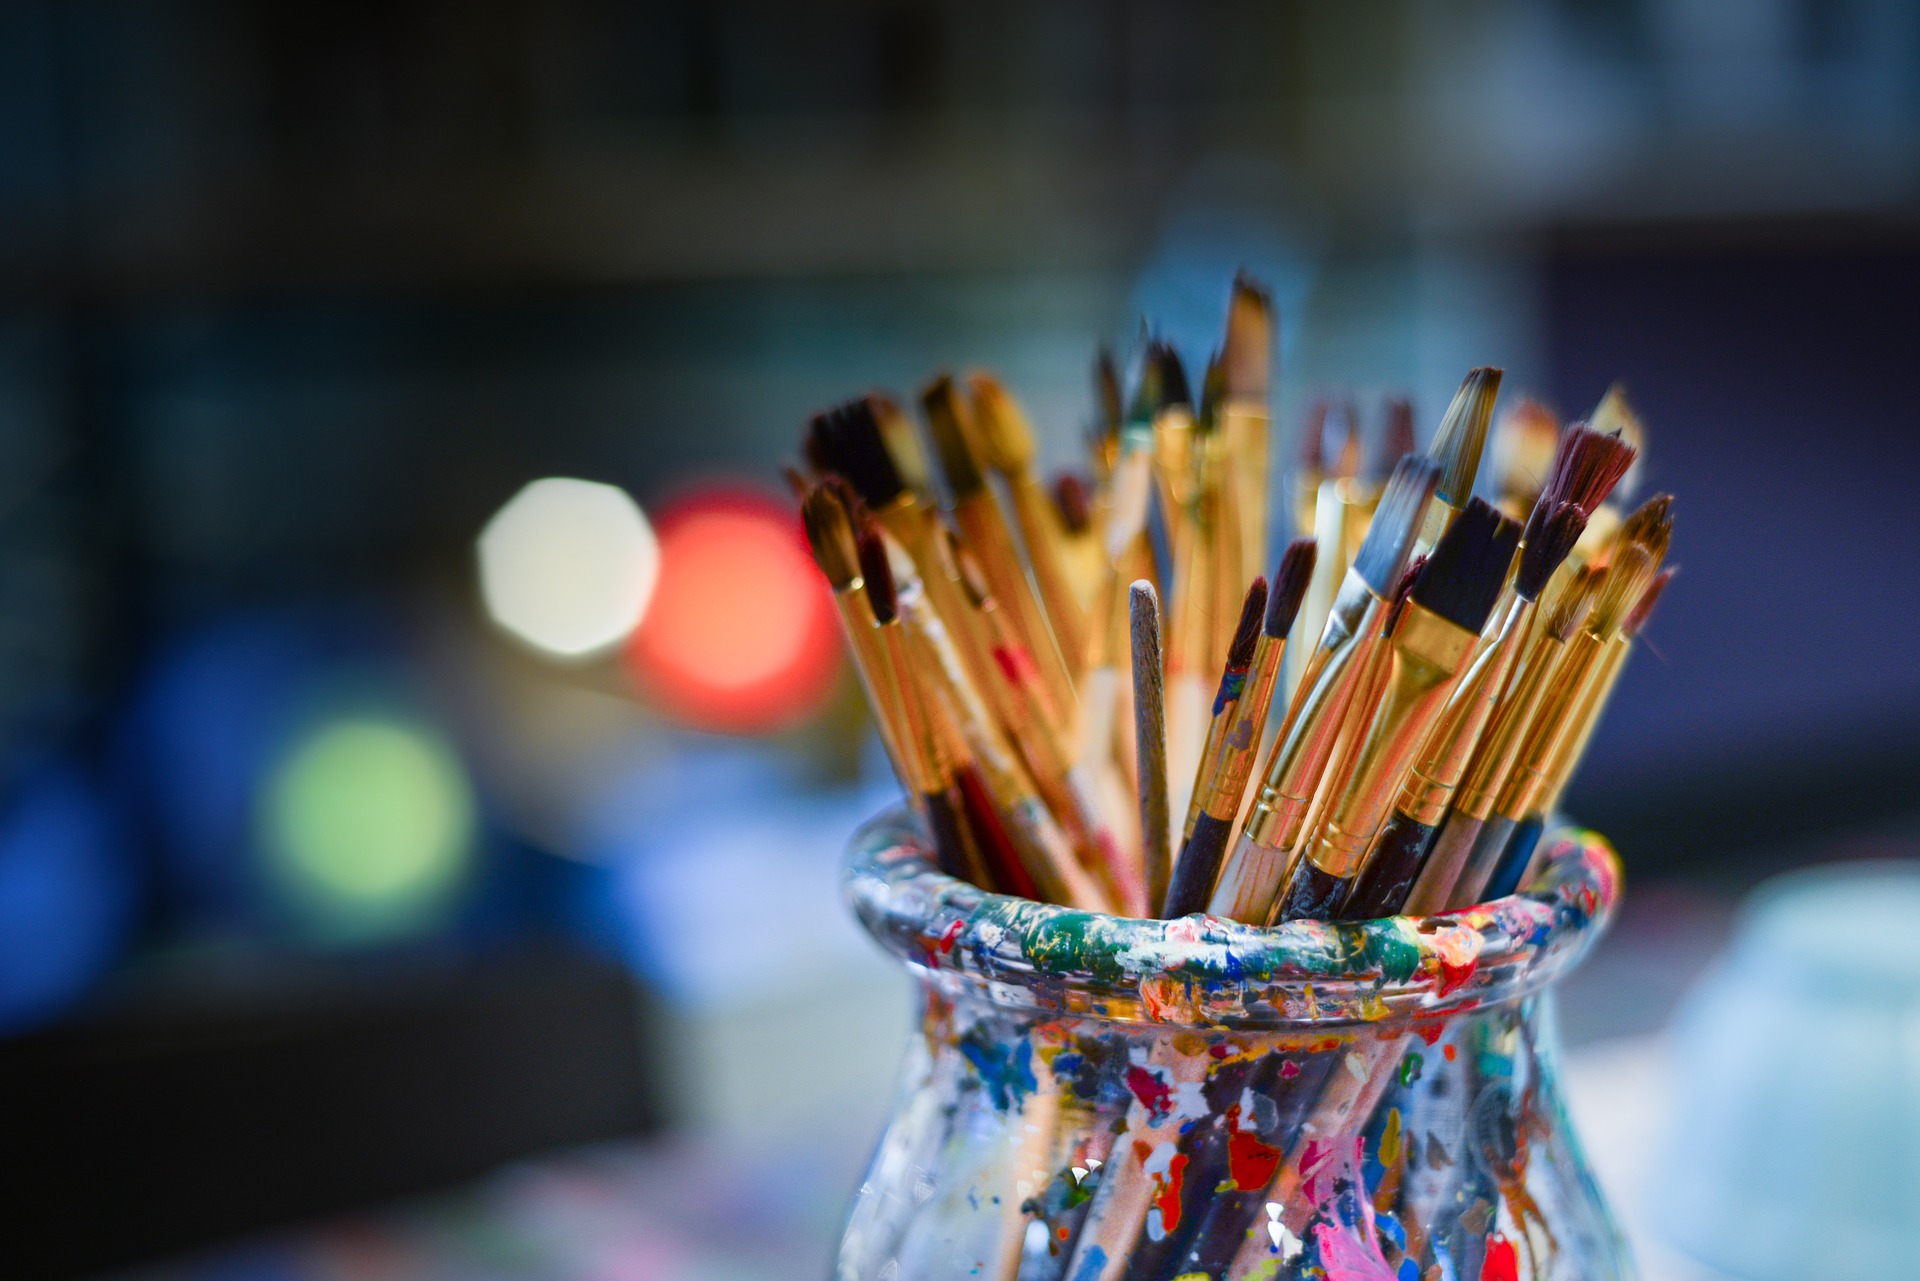 Stock photo of paint brushes (Image by RawPixel.com)